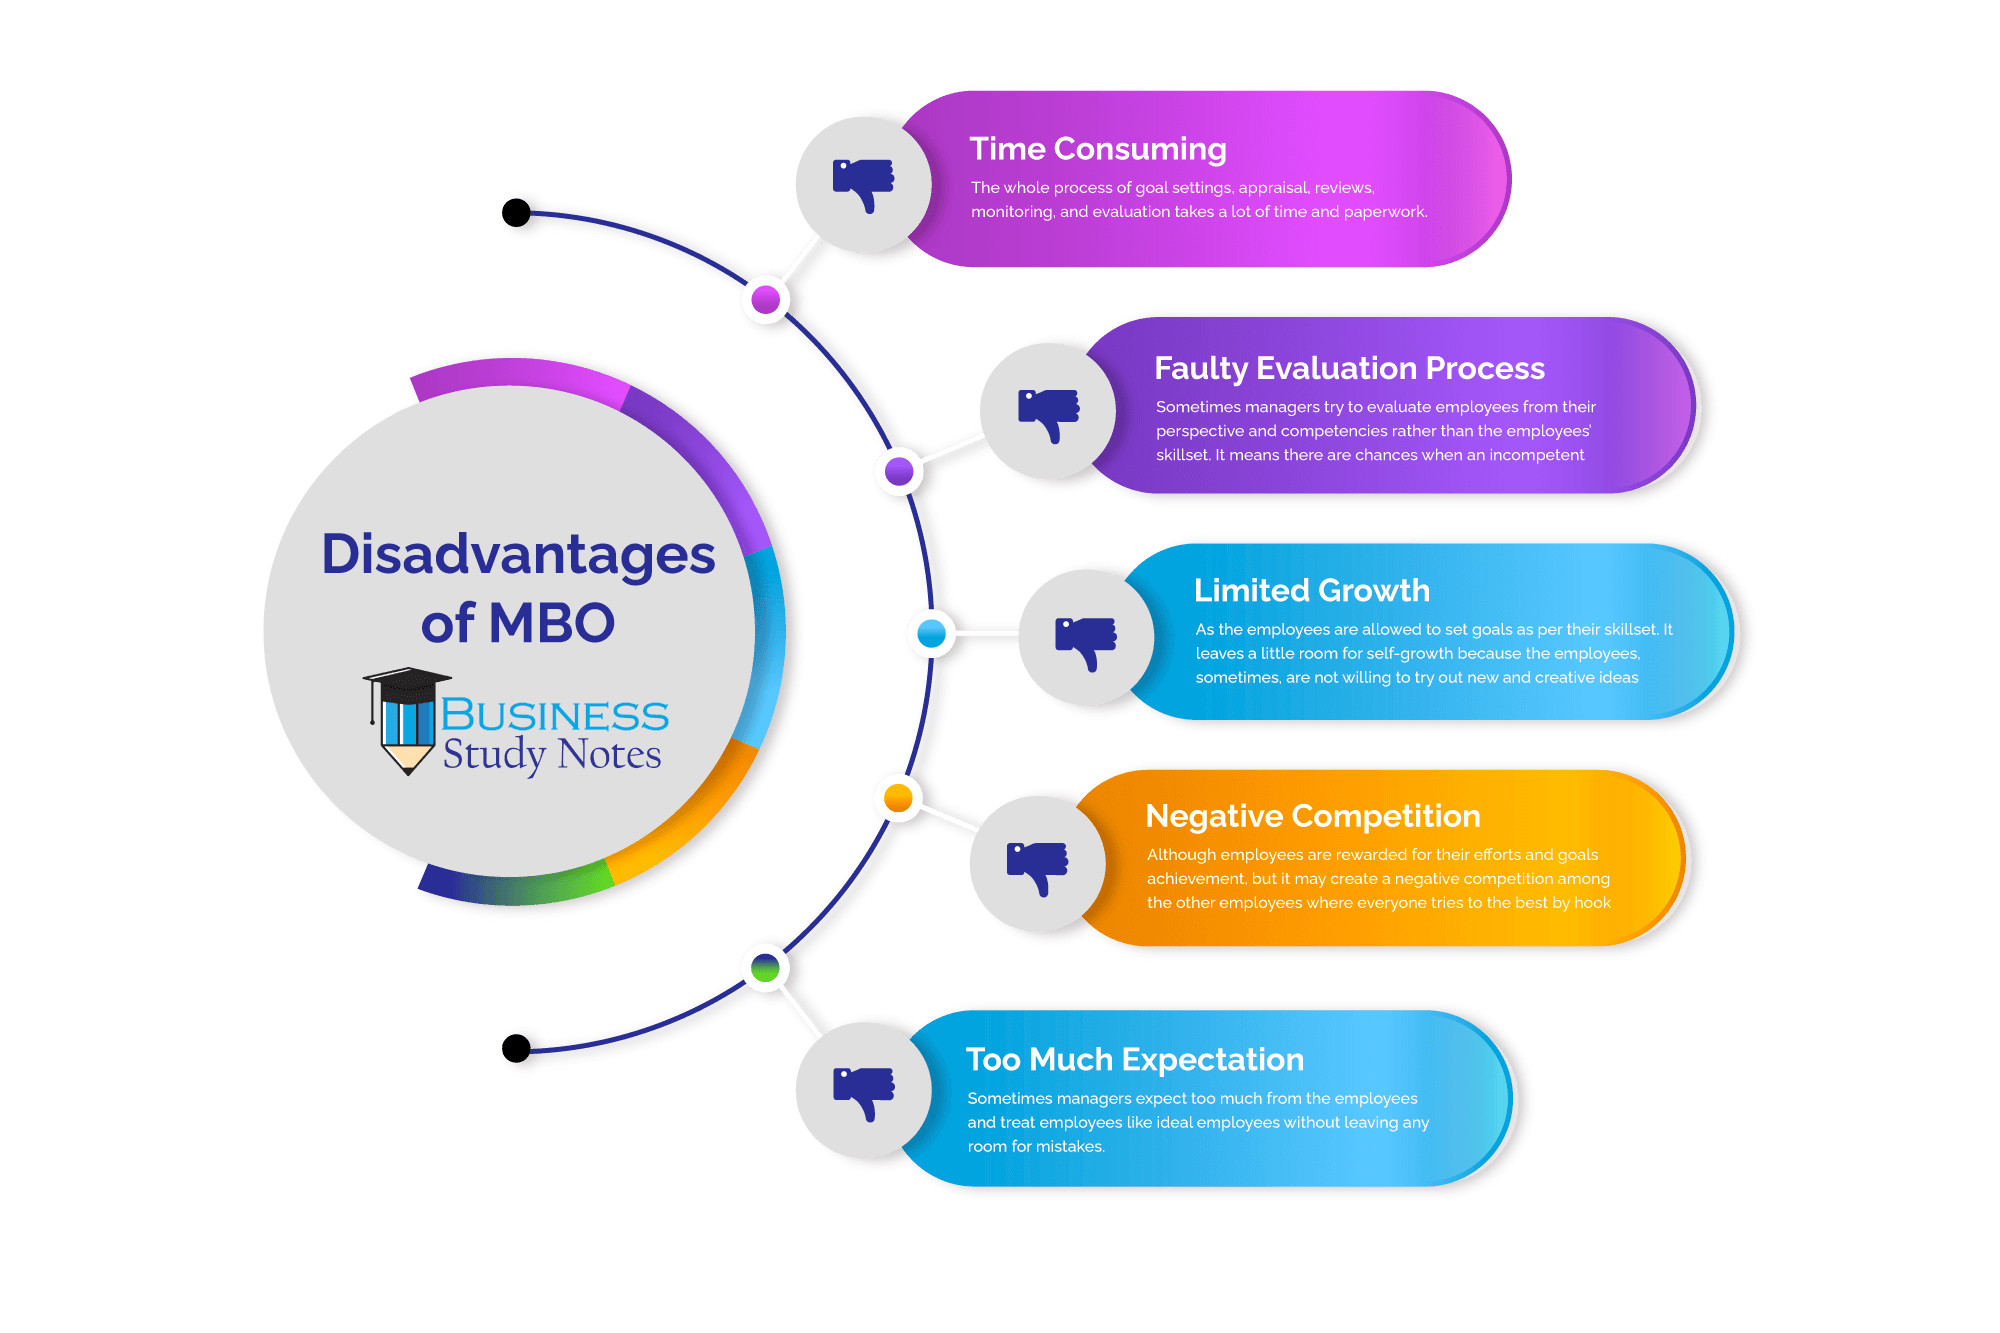 Disadvantages of MBO